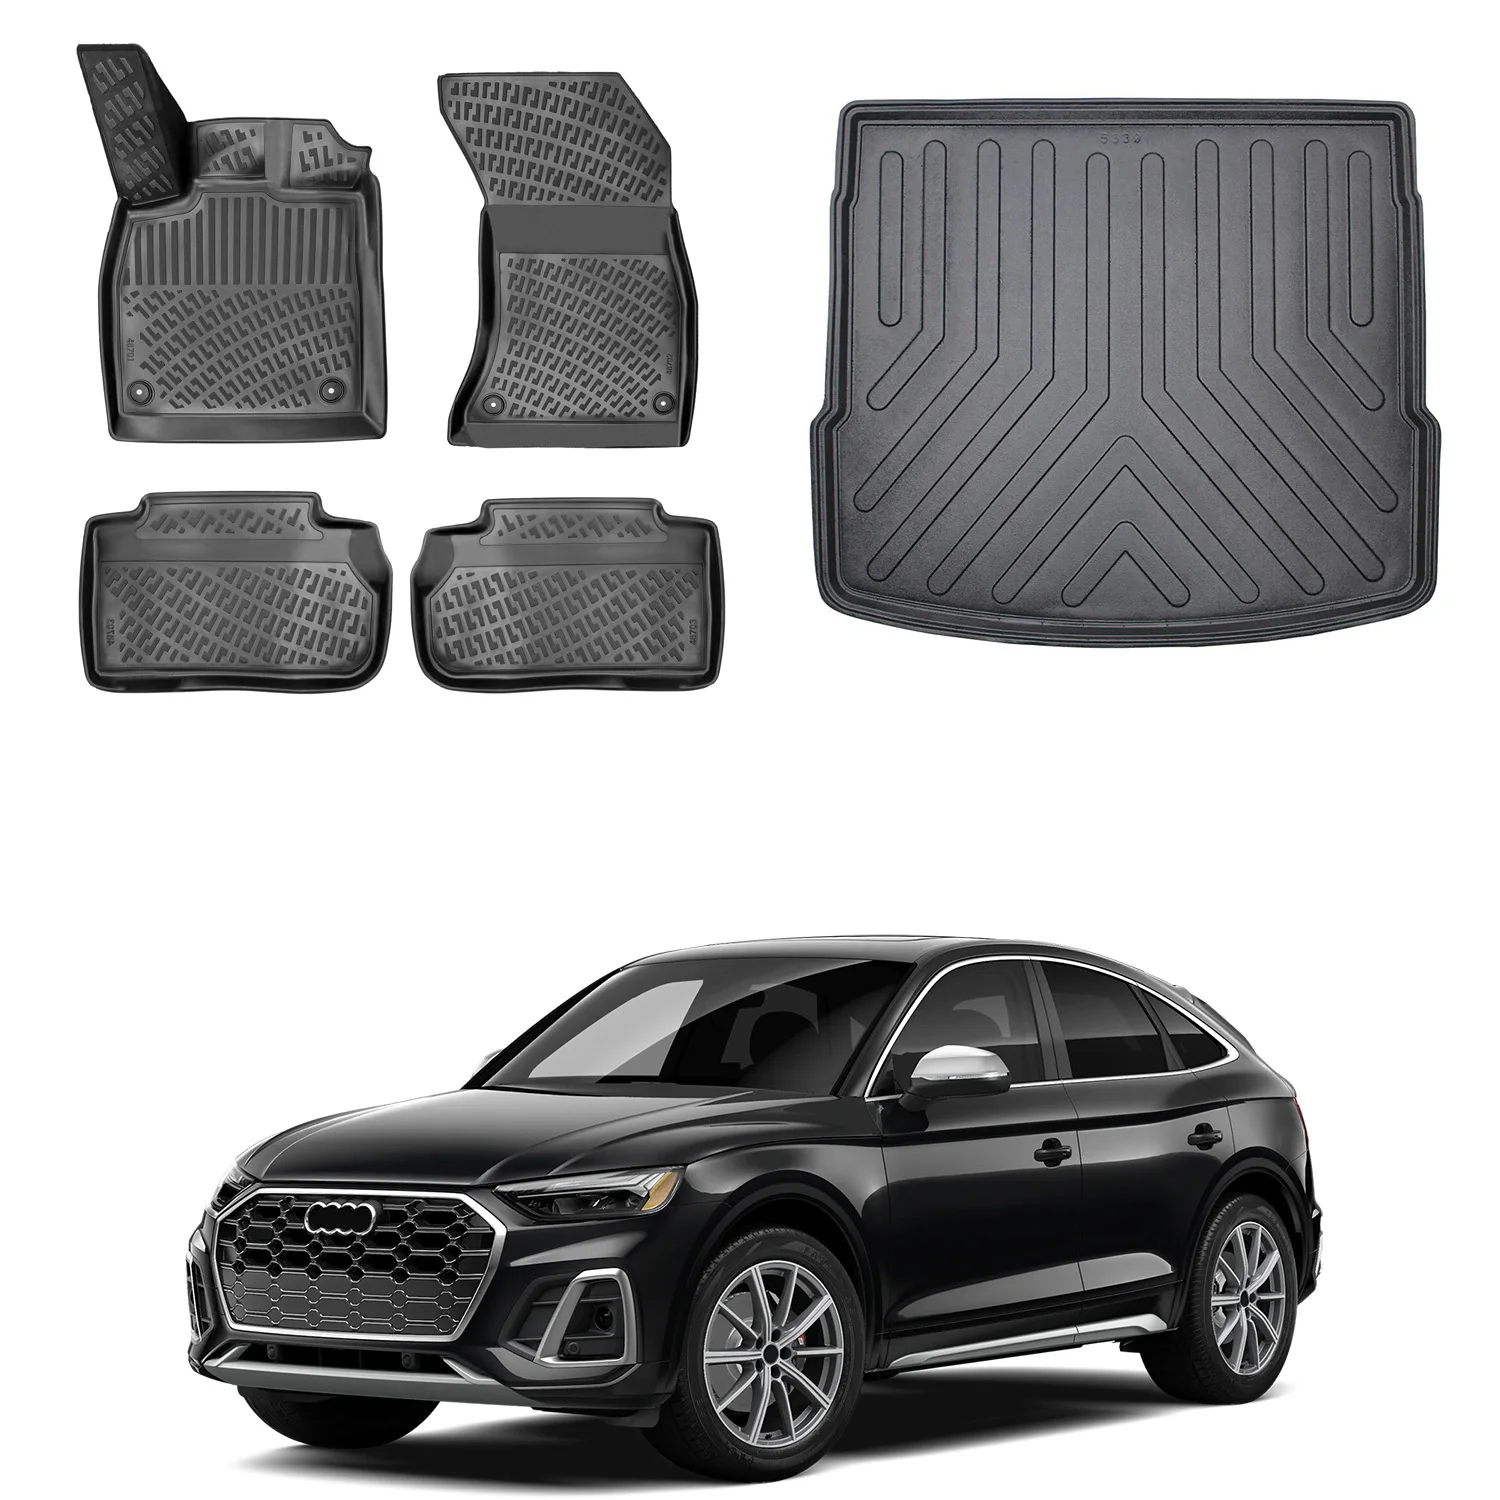 

Floor Mats + Cargo Trunk Liner Fits Audi Q5 Sportback 2020-2024 SUV Set - All Weather Maximum Coverage - Water Resistance